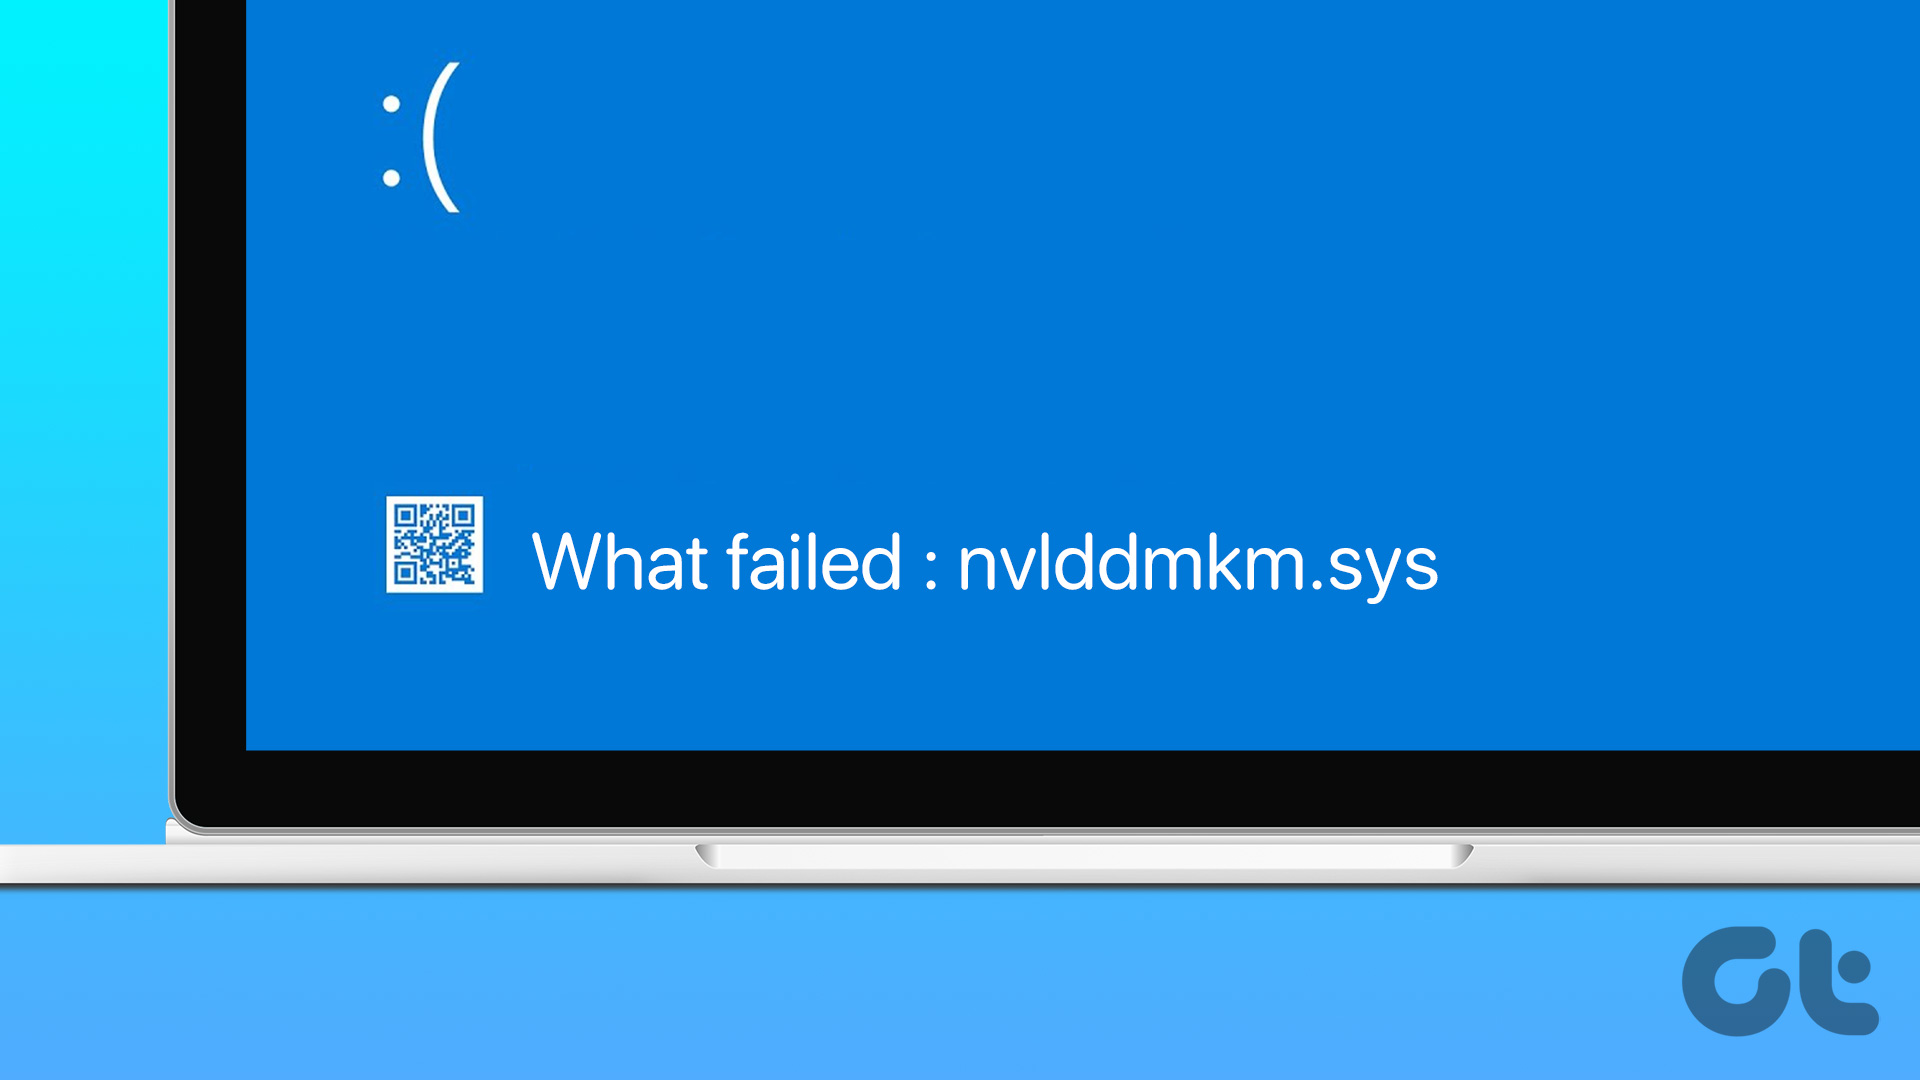 Top 7 Ways to Fix the ‘nvlddmkm.sys Failed’ Error in Windows